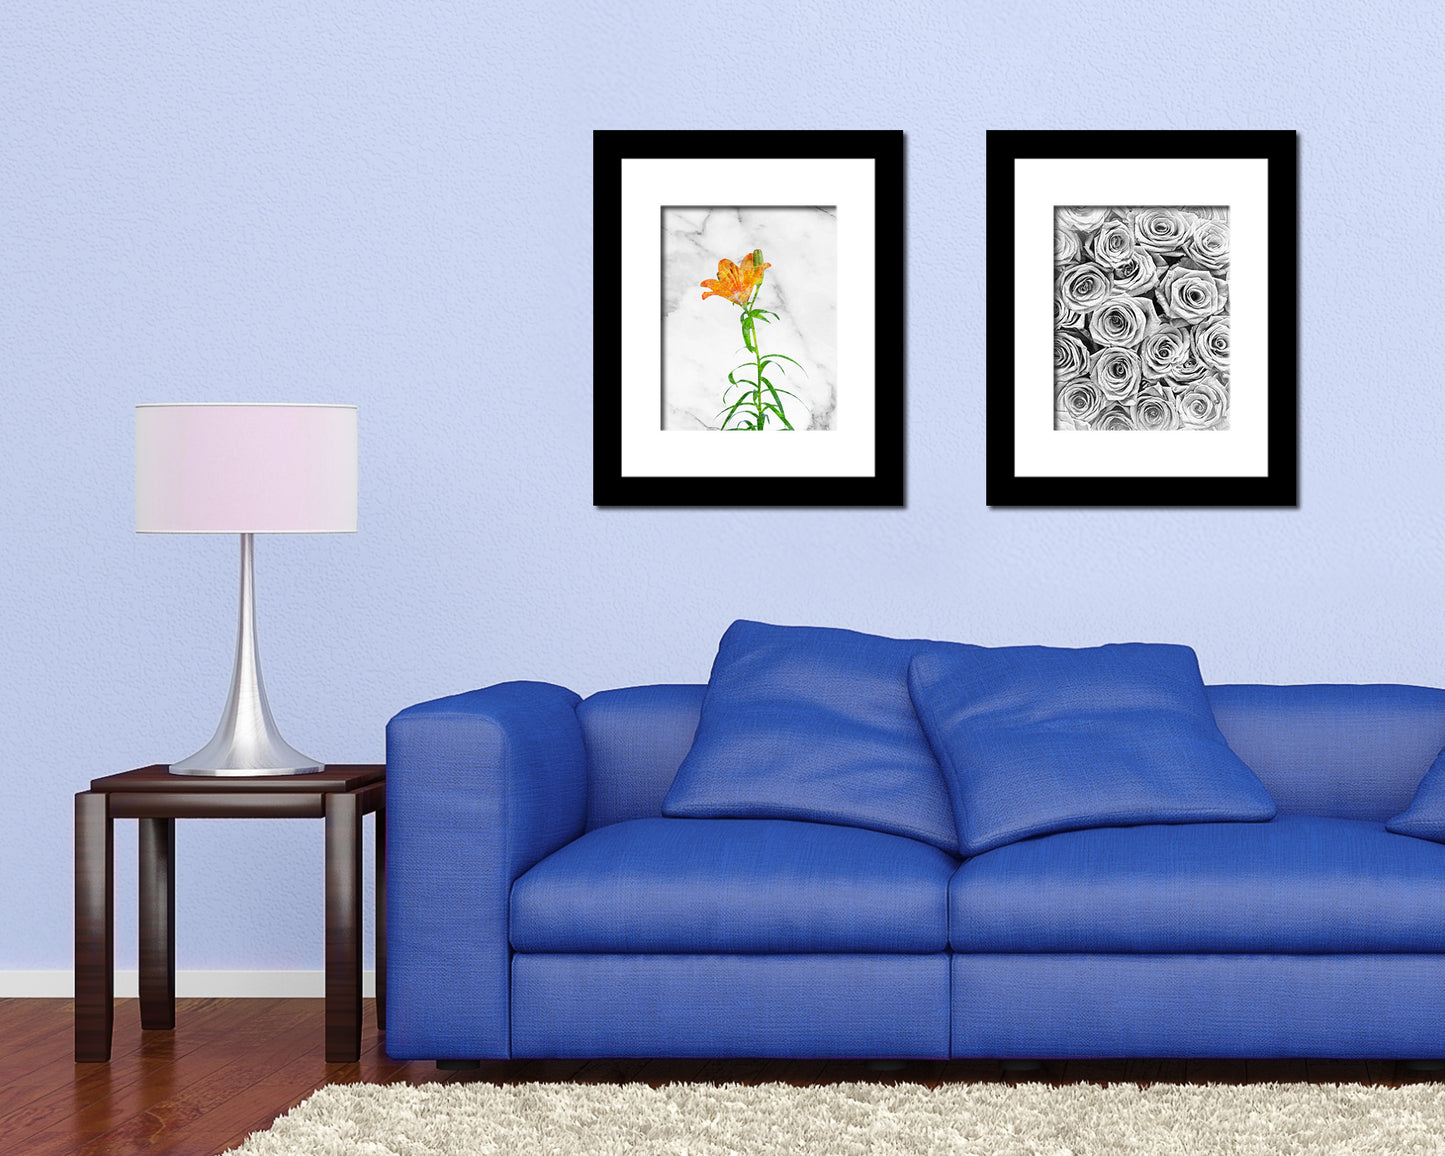 Orange Lily Marble Texture Plants Art Wood Framed Print Wall Decor Gifts